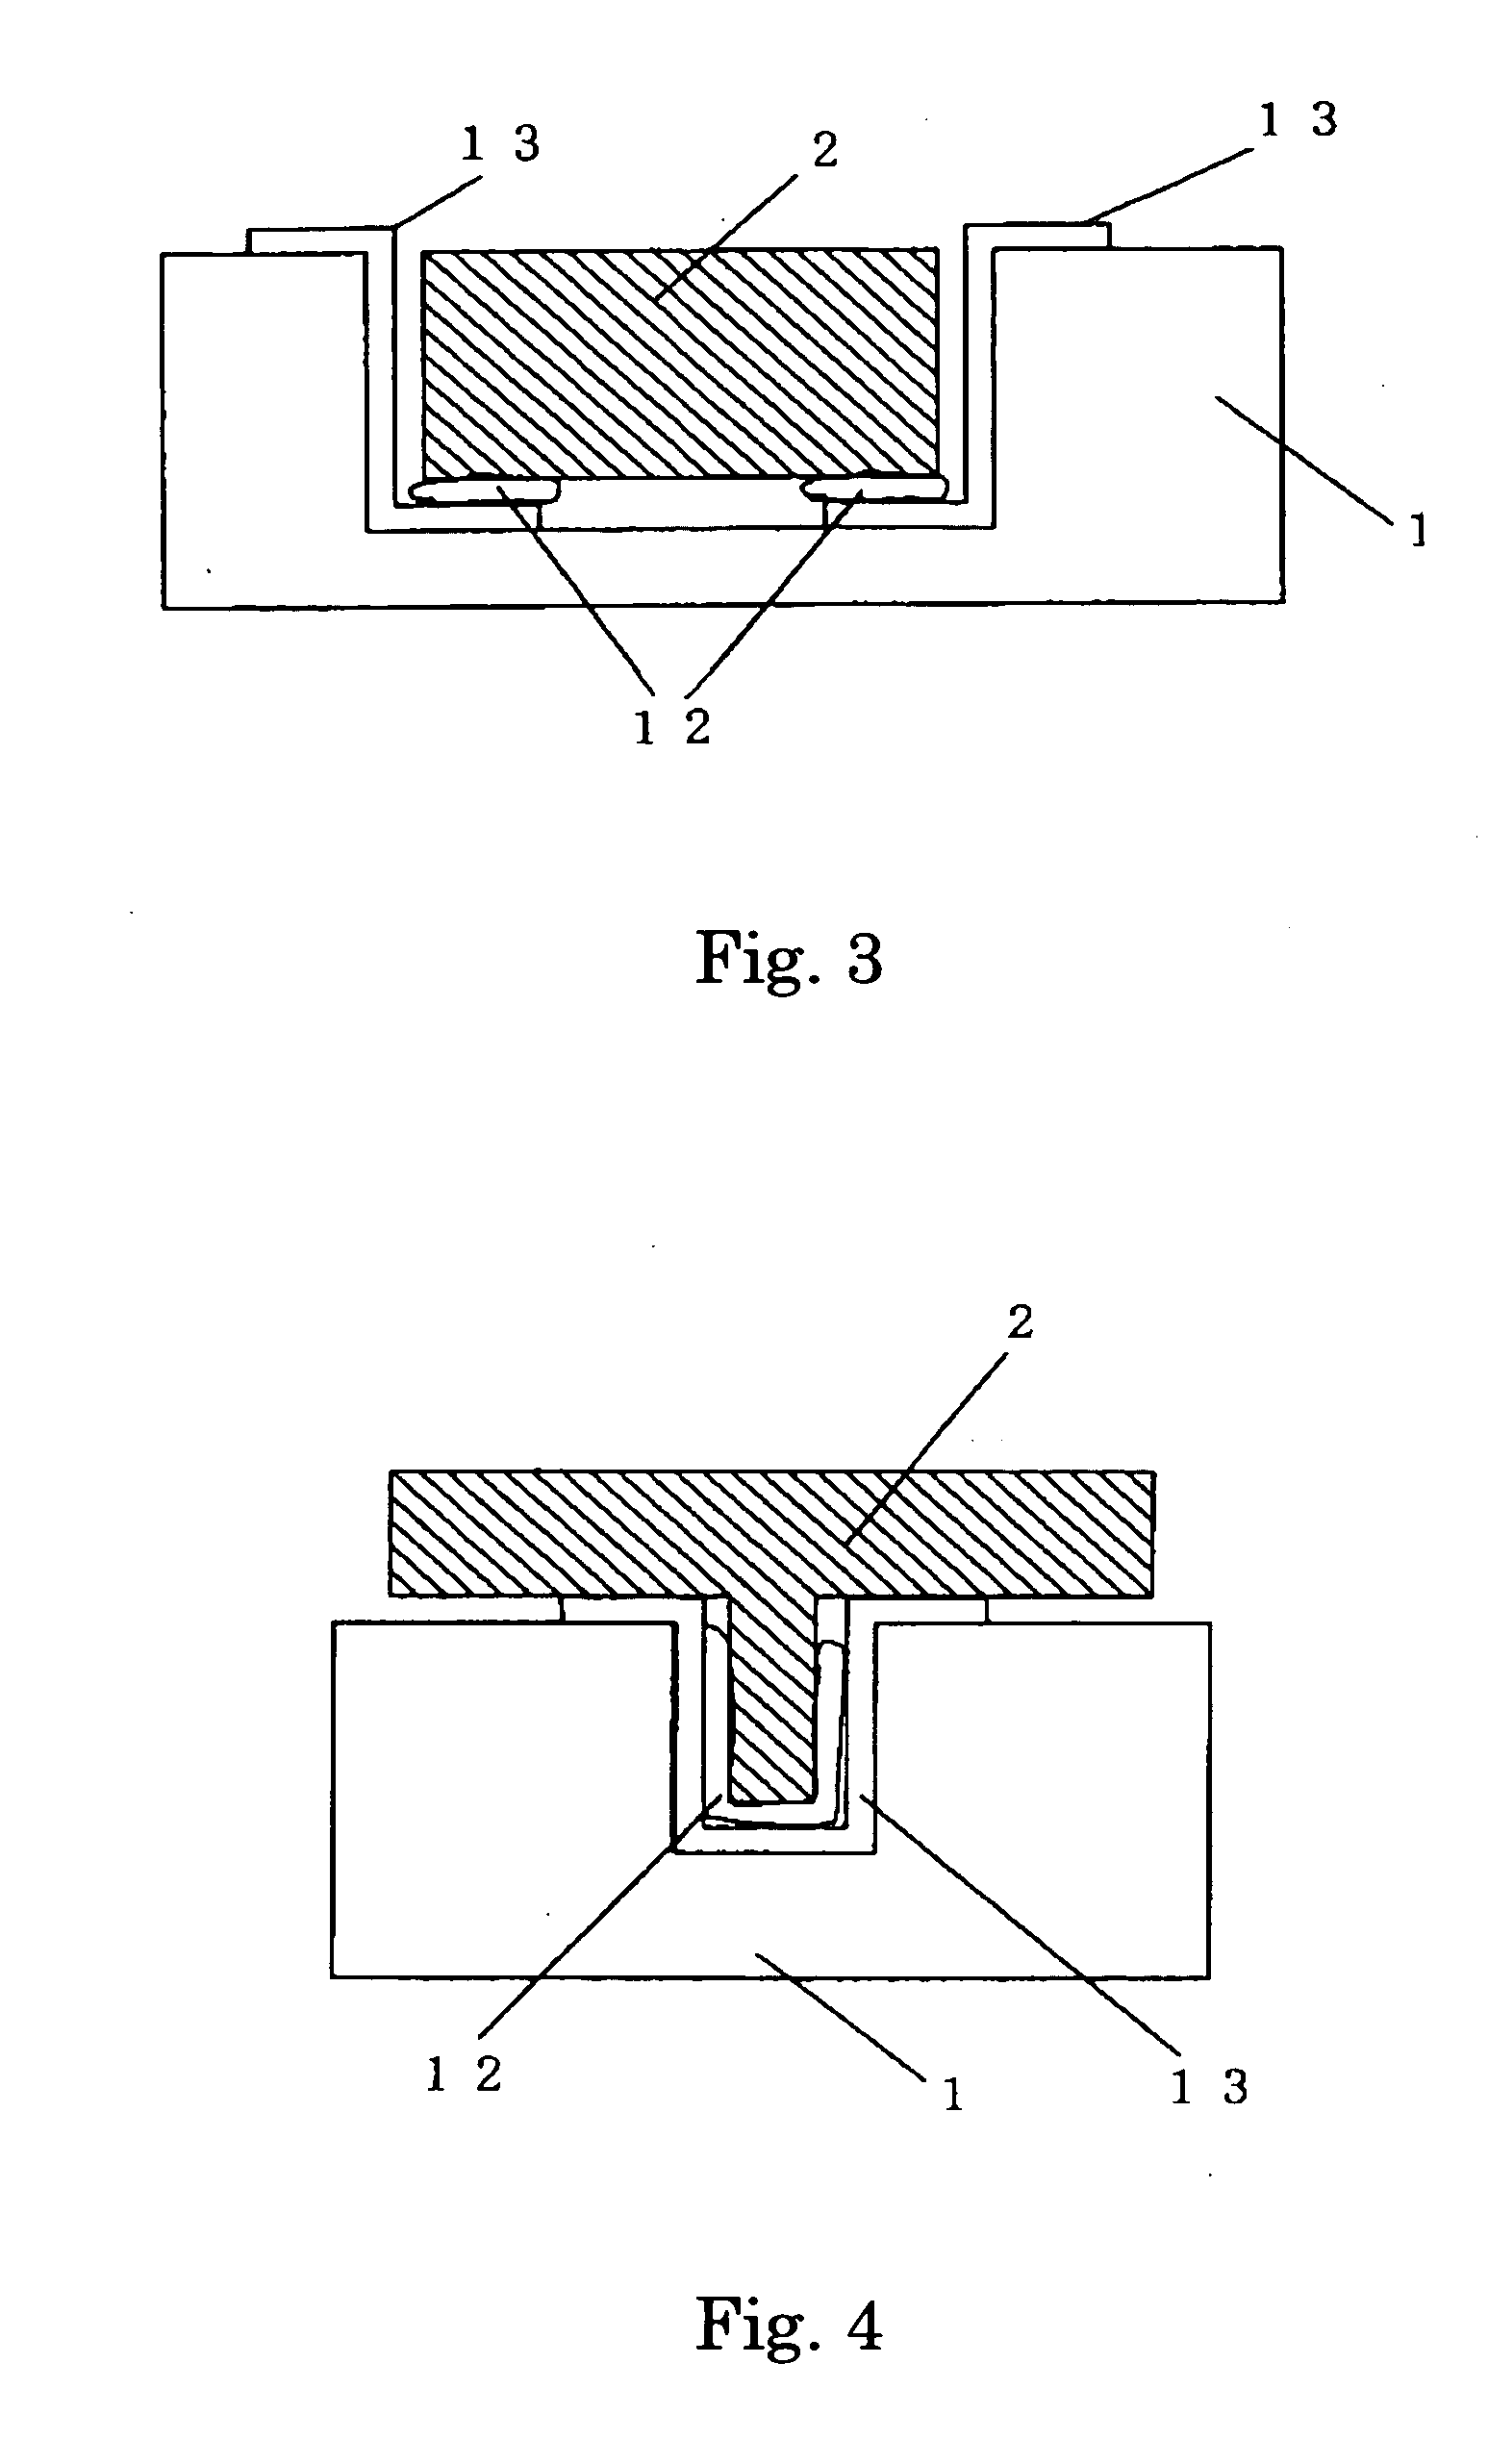 Electronic circuit device having silicon substrate